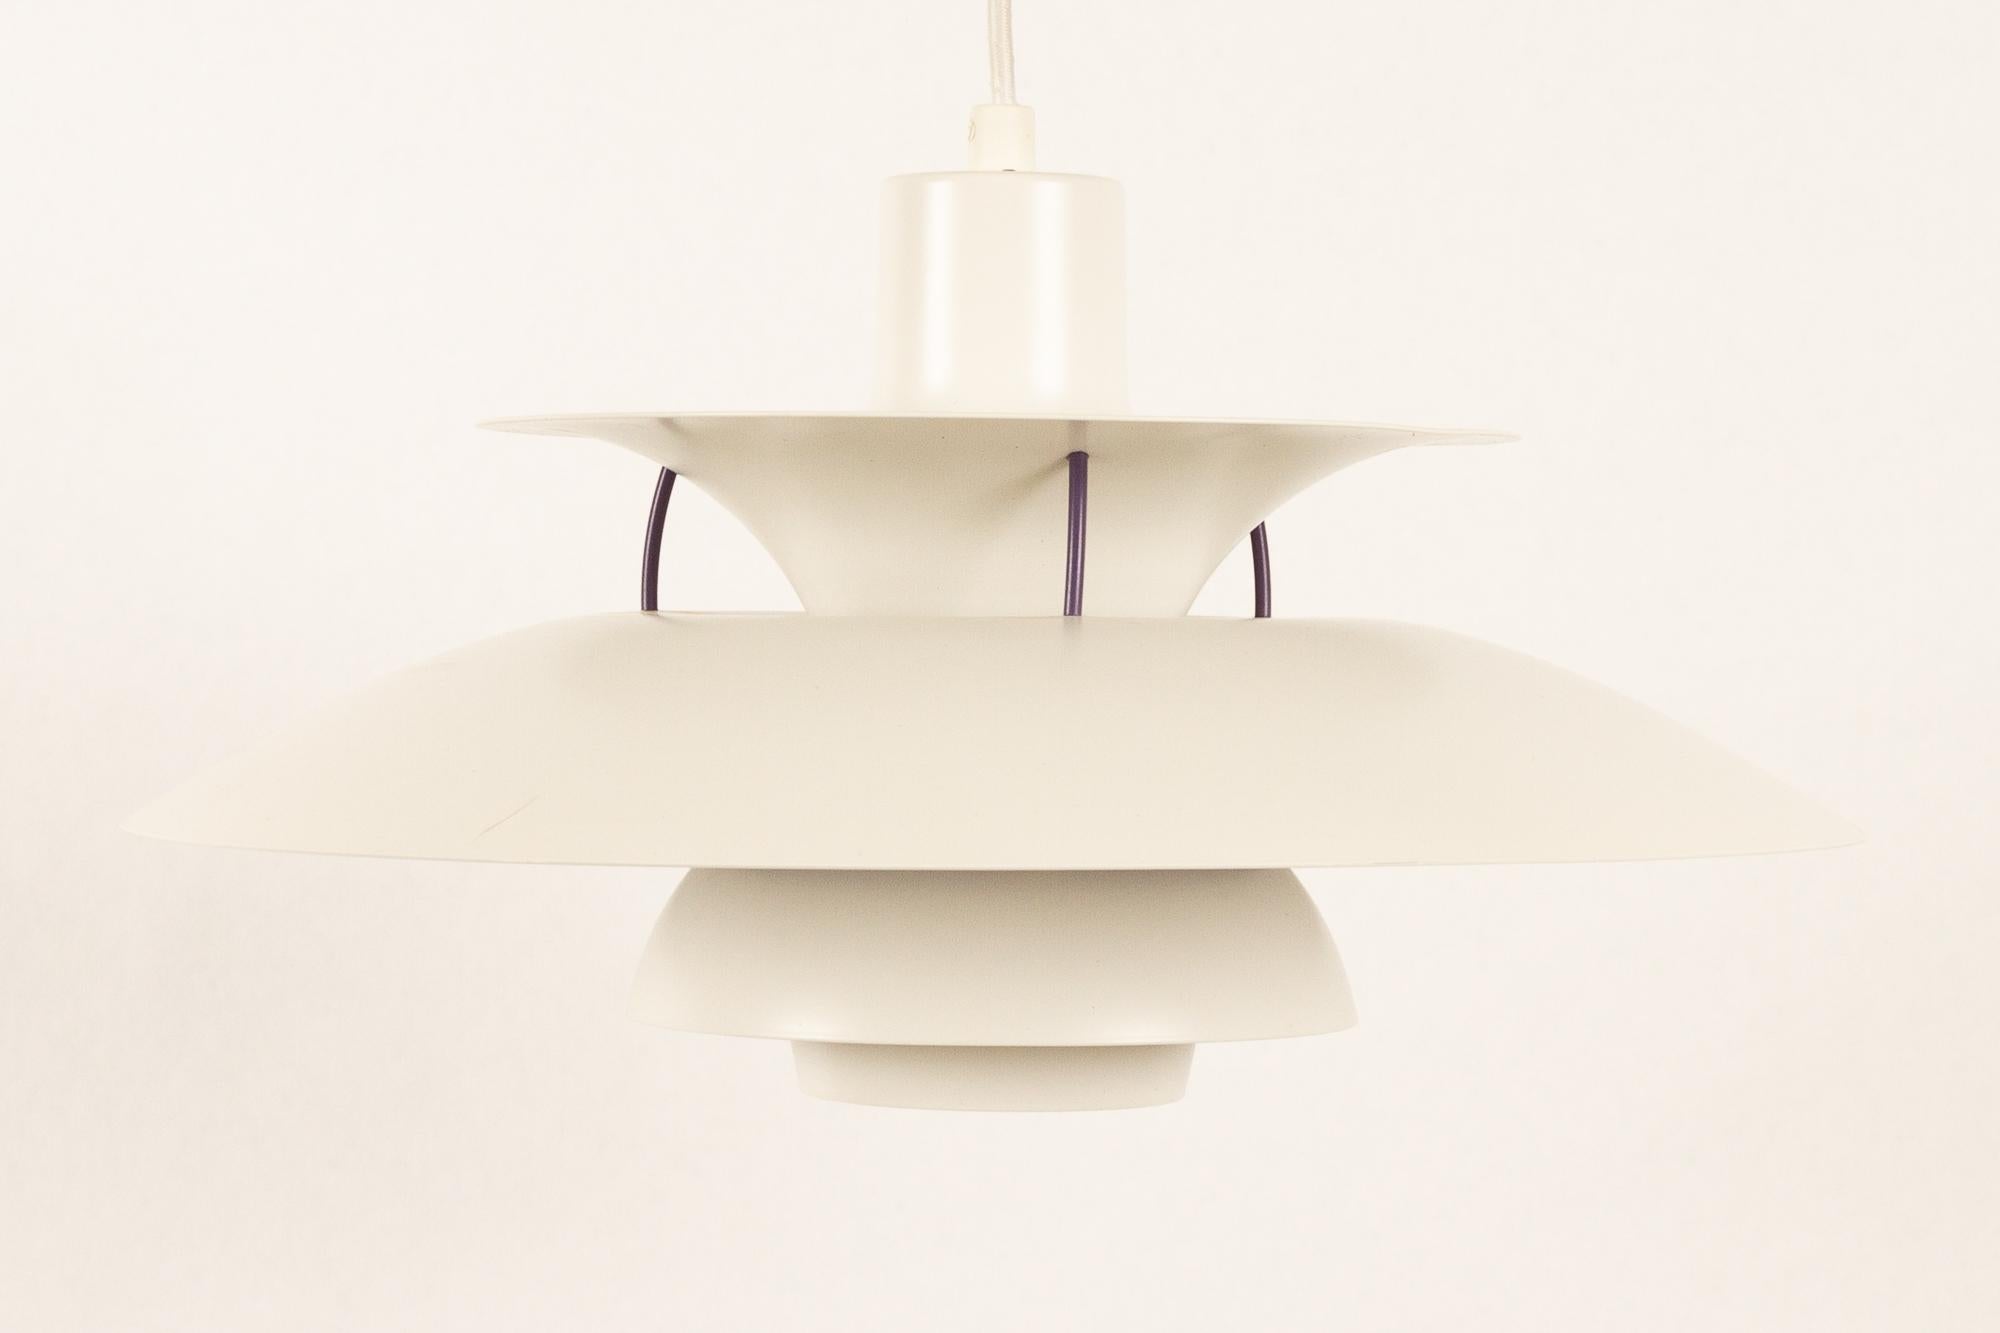 Danish vintage white ceiling pendant PH5 by Poul Henningsen 1990s.
Iconic Danish lighting designed in 1958 by Poul Henningsen for Louis Poulsen. This model is known as PH 5 because it has five individual shades. Emits a soft light outwards and